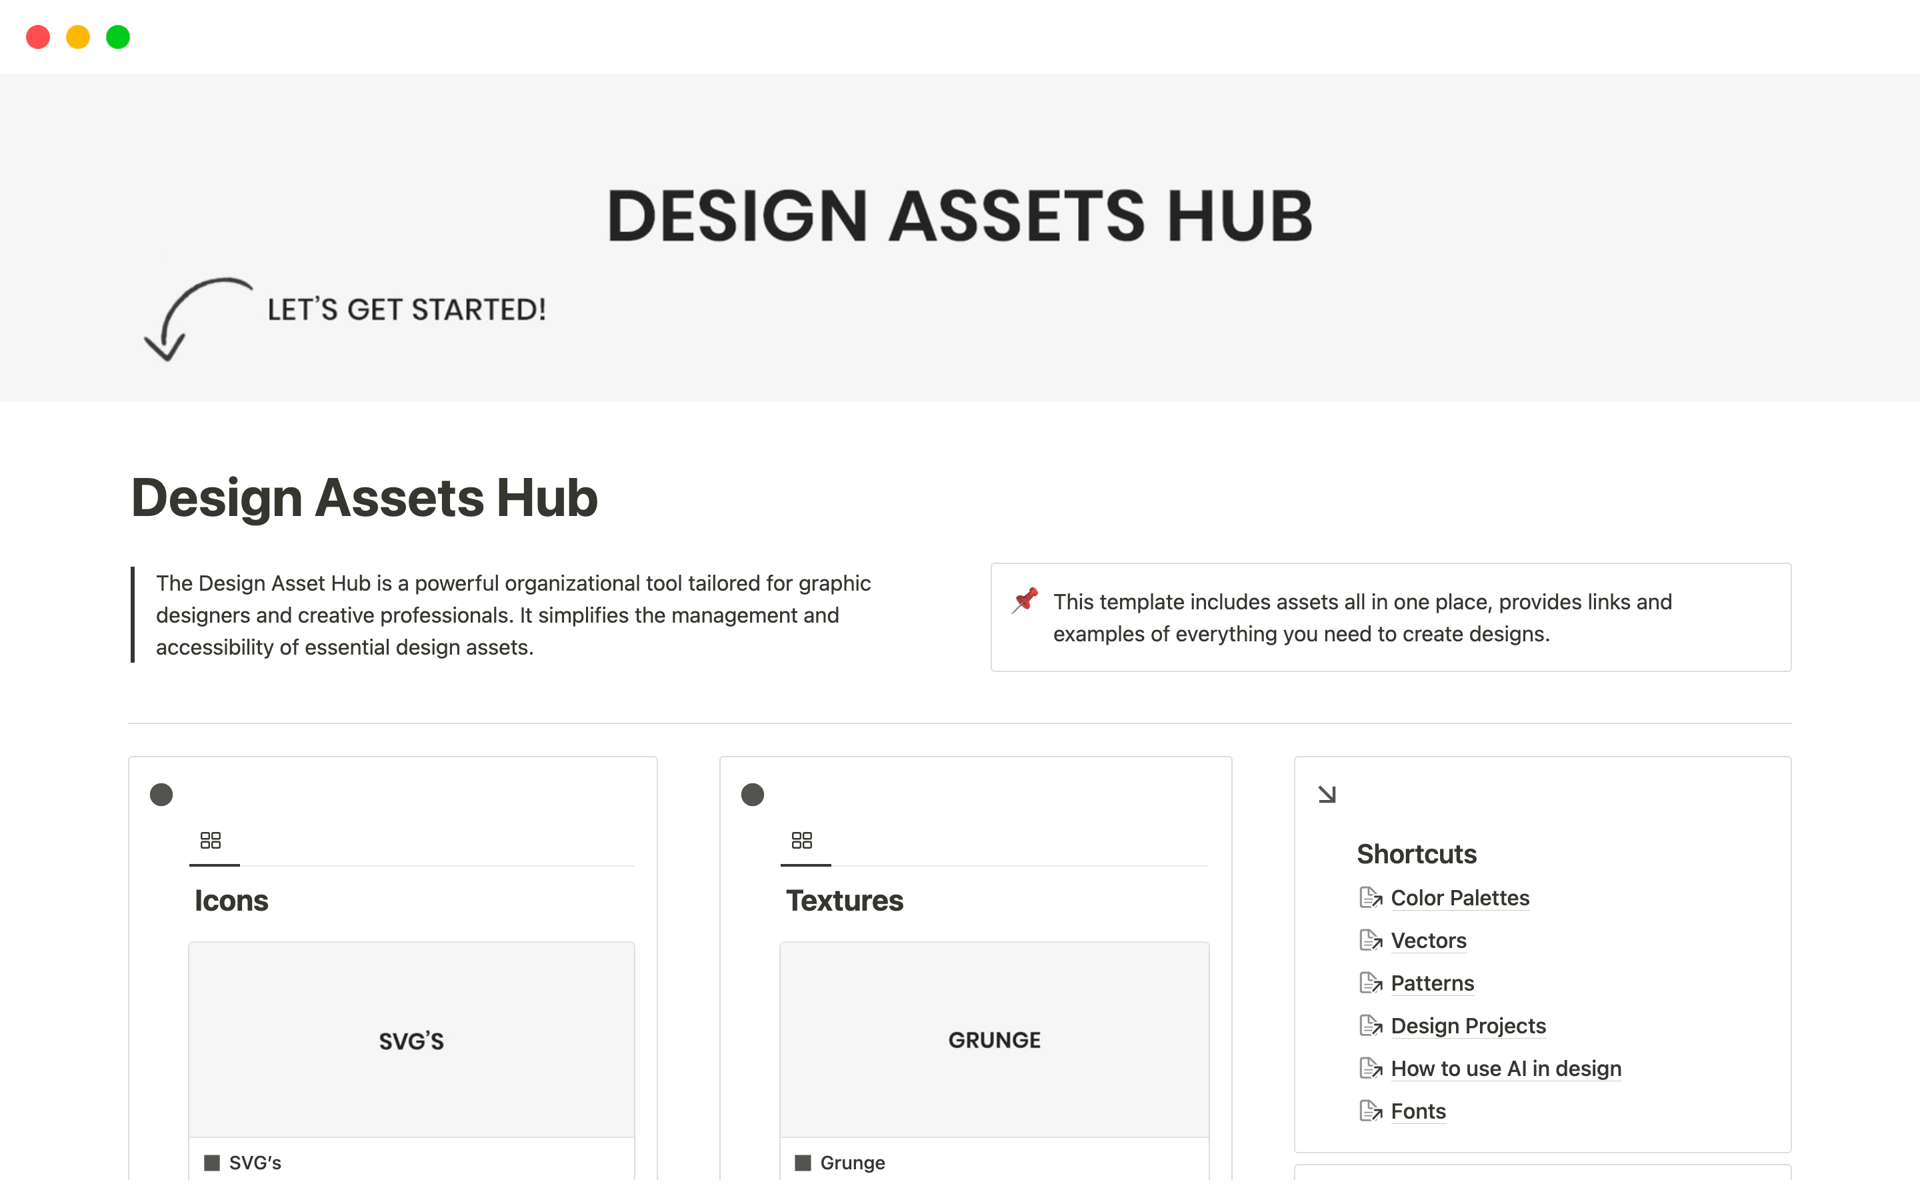 This template includes assets all in one place, provides links and examples of everything you need to create designs.